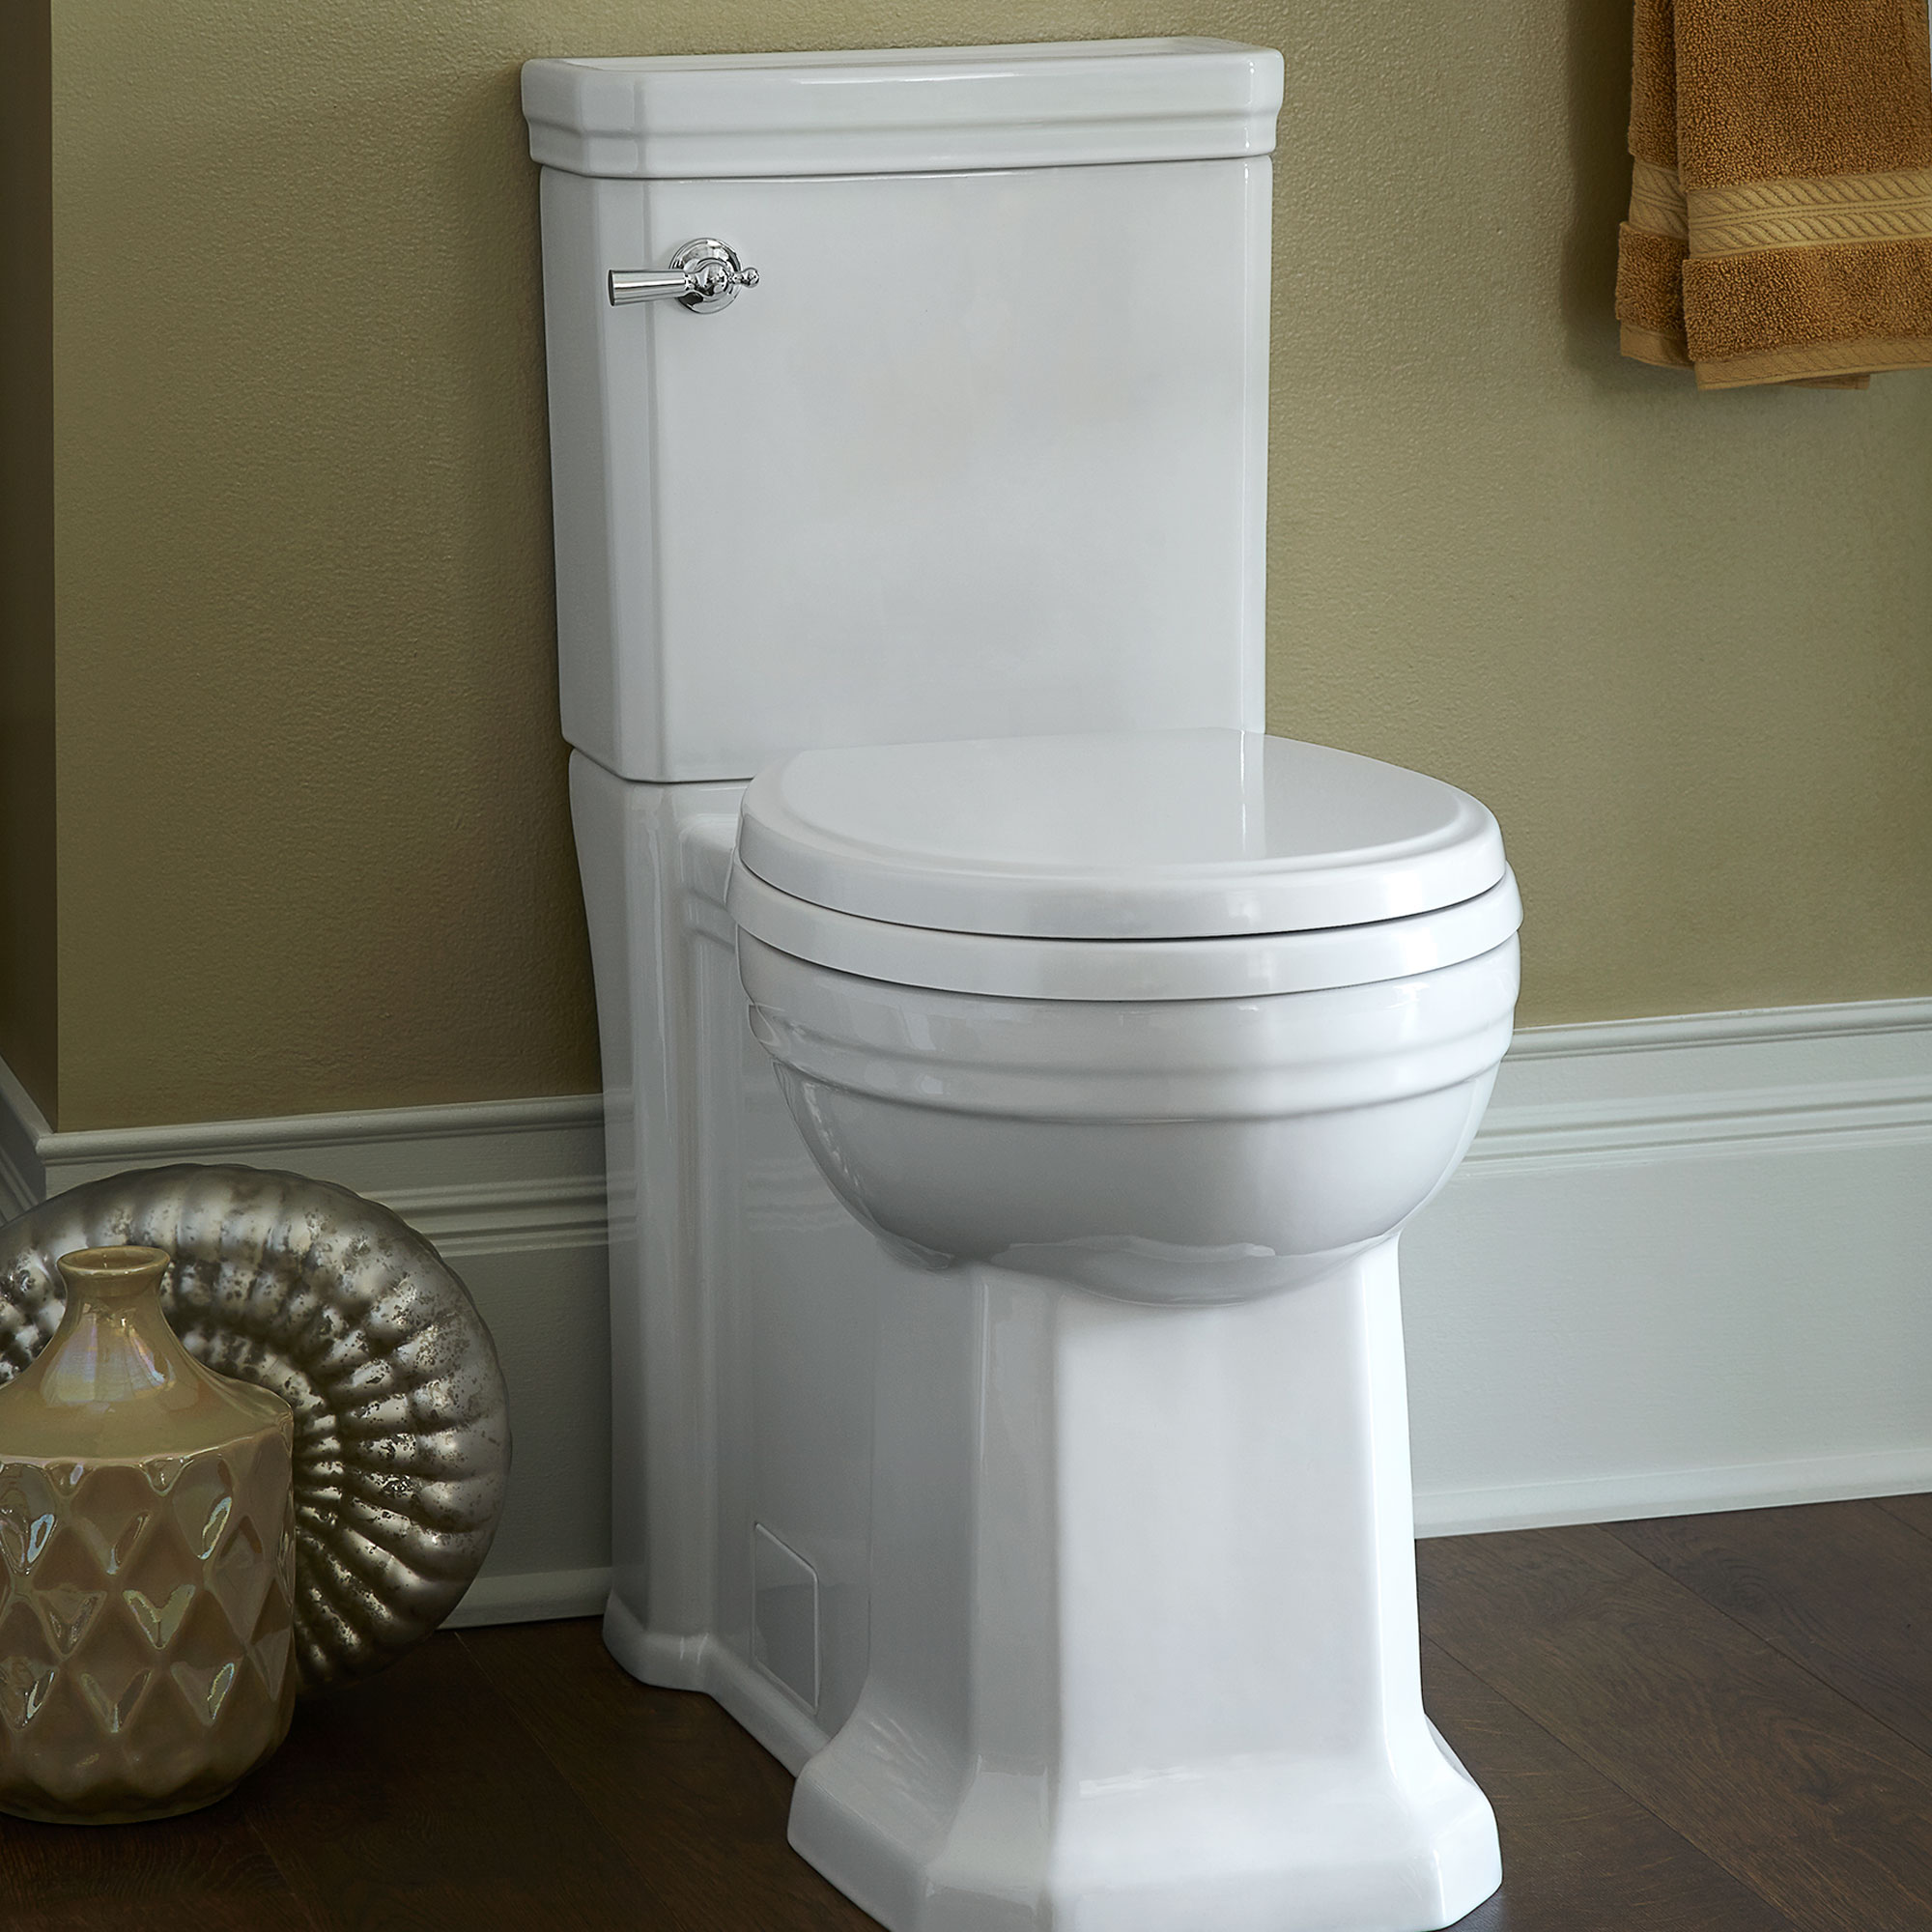 Fitzgerald® Two-Piece Chair-Height Round-Front Toilet with Seat